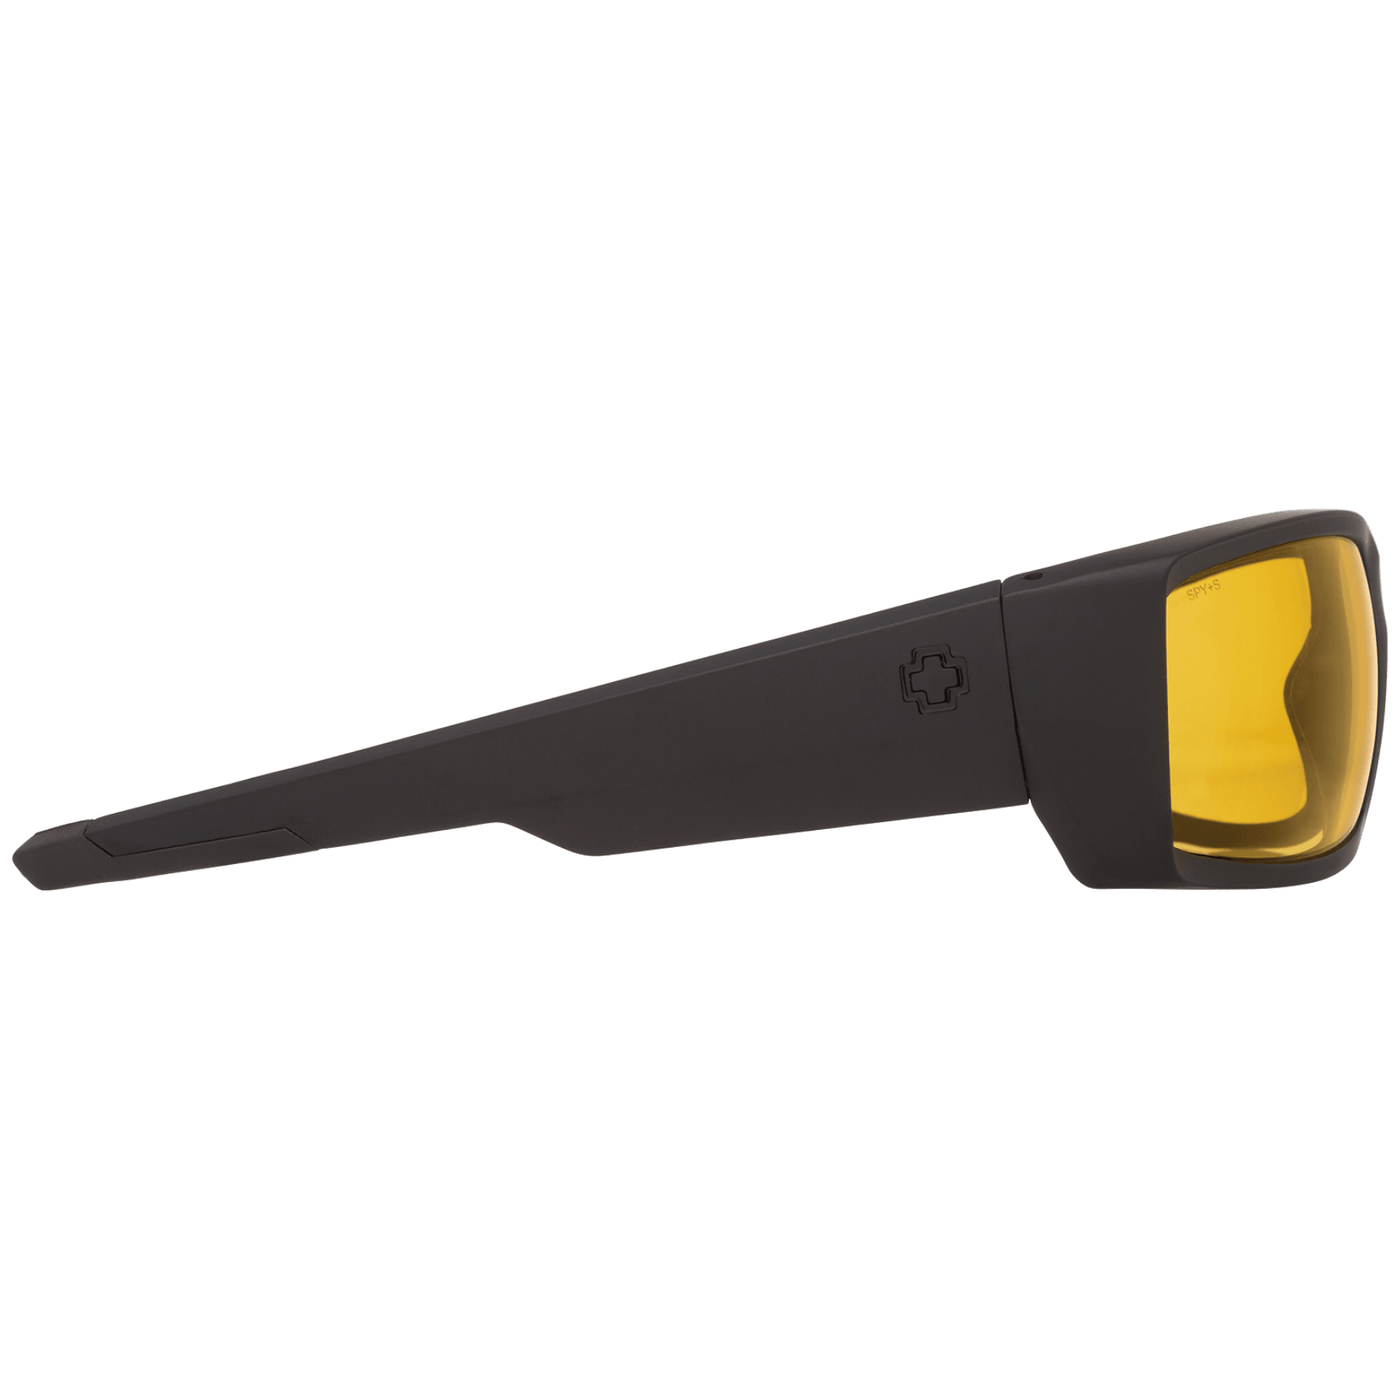 SPY GENERAL Sunglasses, ANSI Z87.1 - Yellow 8Lines Shop - Fast Shipping